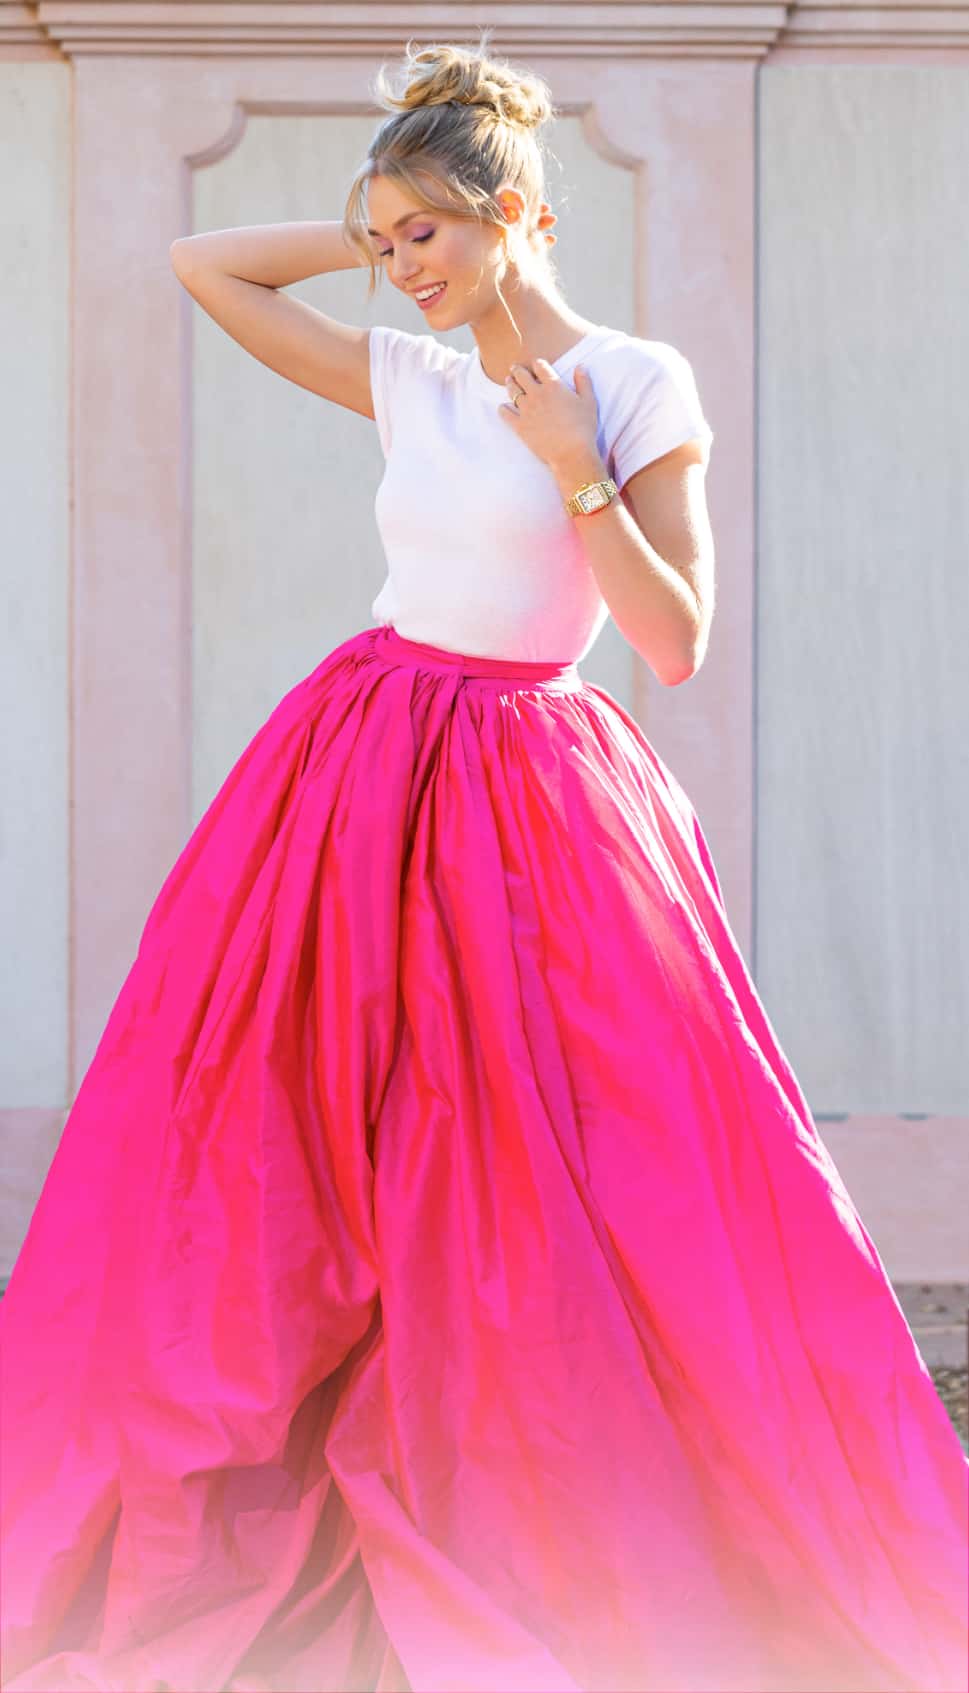 Woman wearing a hot pink skirt and white tee shirt.